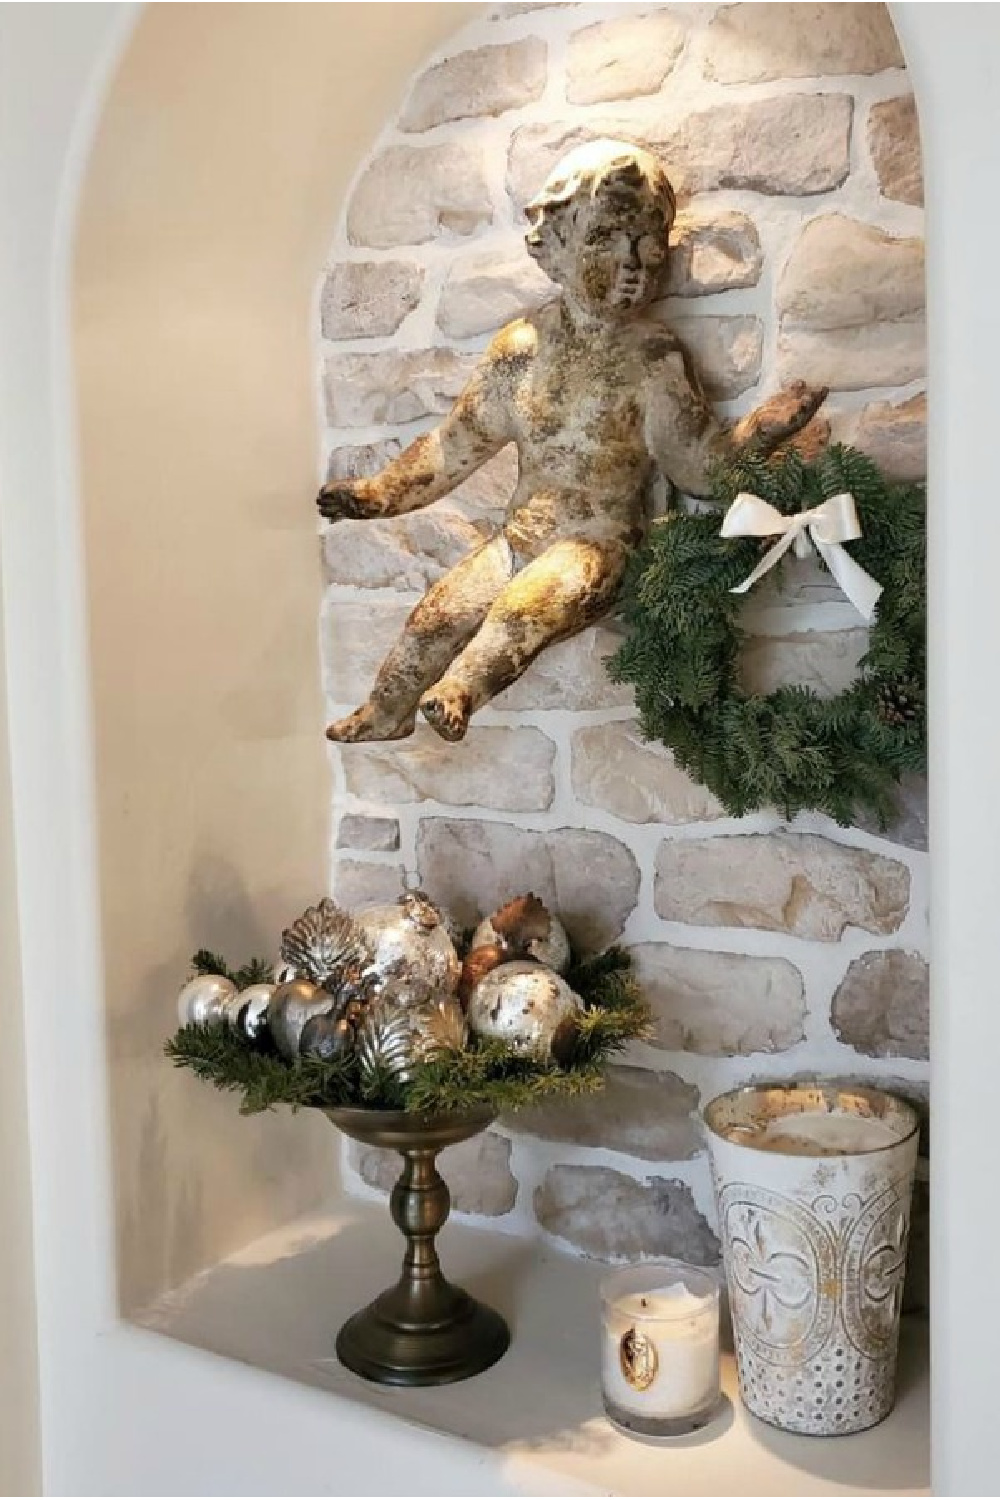 Antique cherub on stone wall holds a fresh Christmas wreath for beautiful French country Christmas style.
#frenchchristmas #christmasdecor #whitechristmasdecor